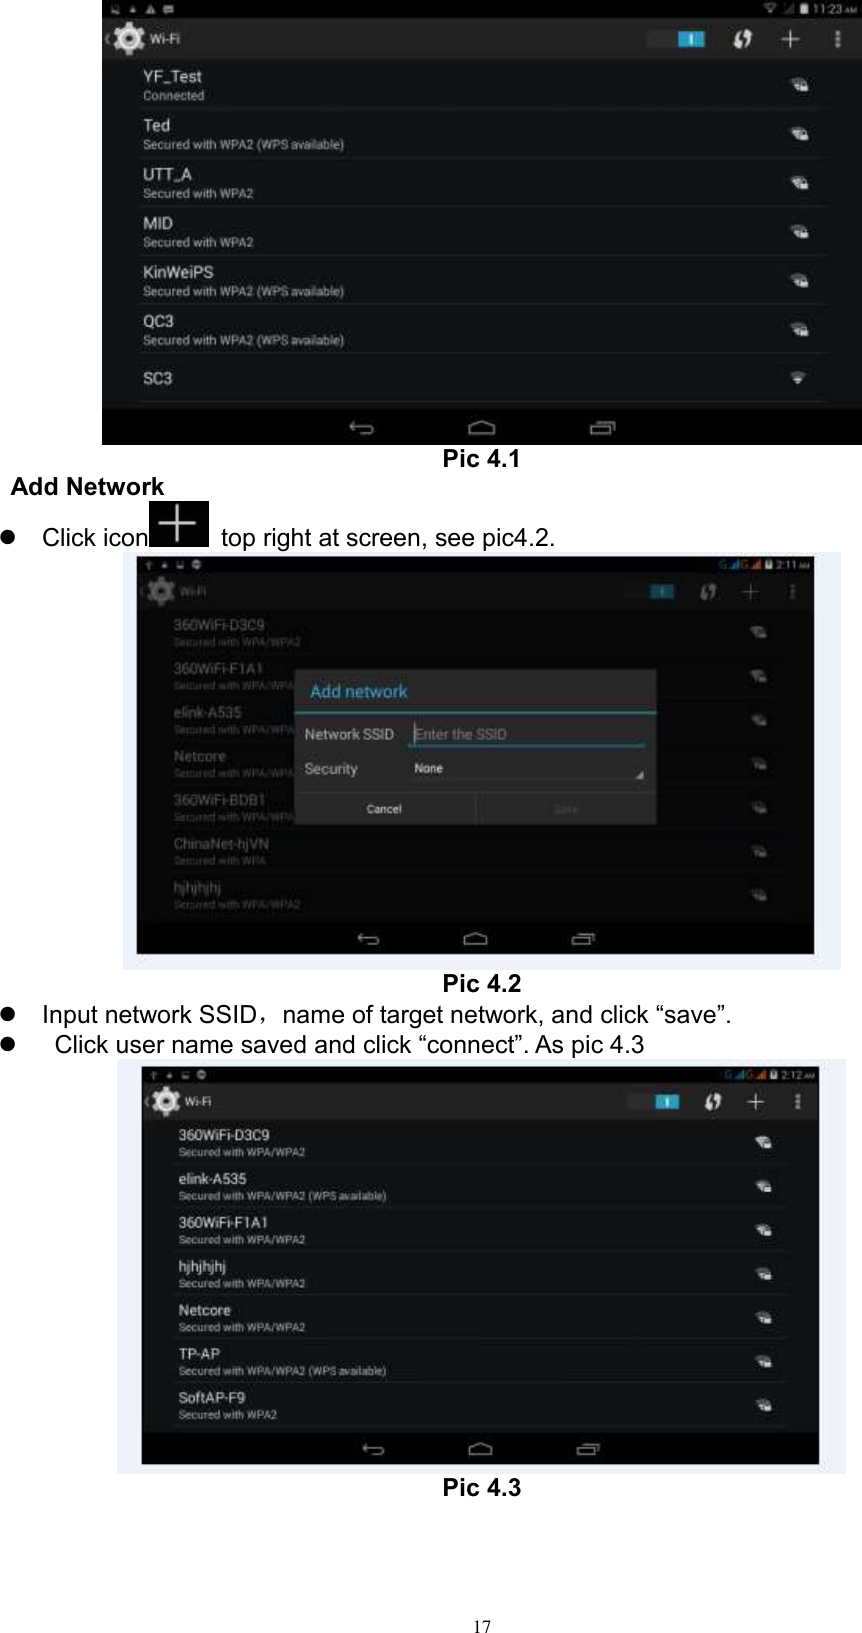      17  Pic 4.1 Add Network   Click icon   top right at screen, see pic4.2.  Pic 4.2  Input network SSID，name of target network, and click “save”.     Click user name saved and click “connect”. As pic 4.3  Pic 4.3 